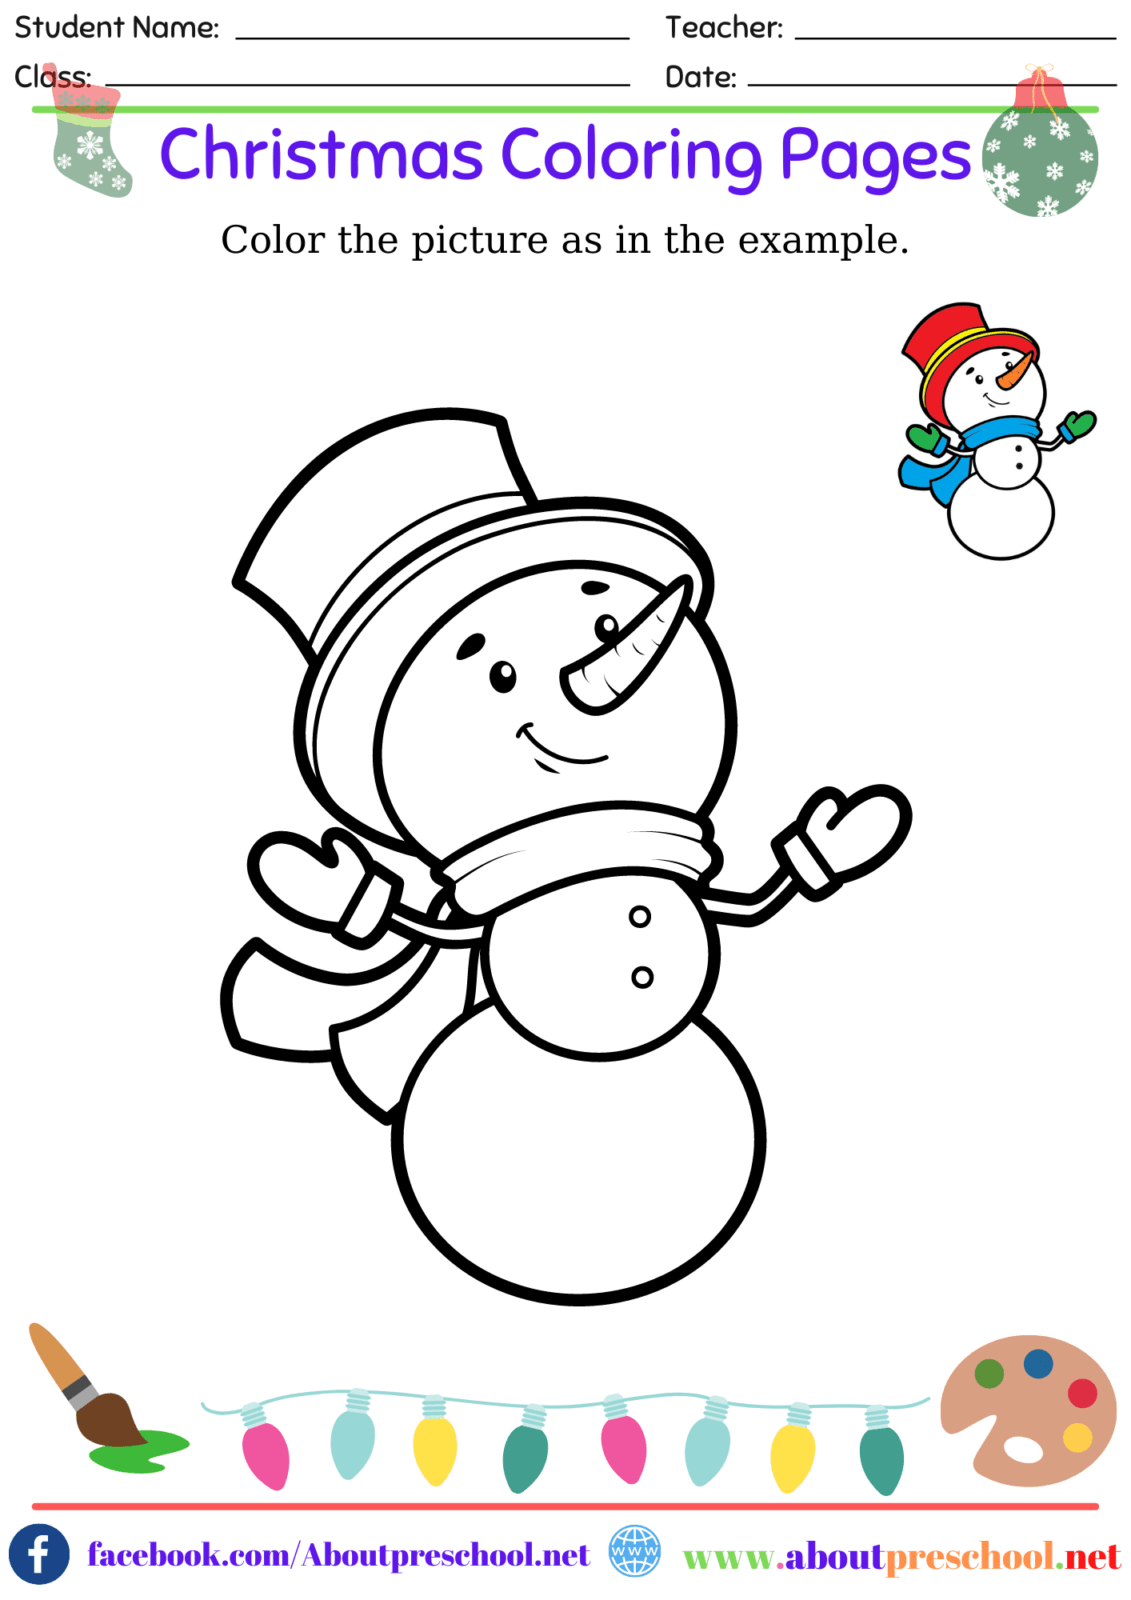 Christmas Coloring Pages 8